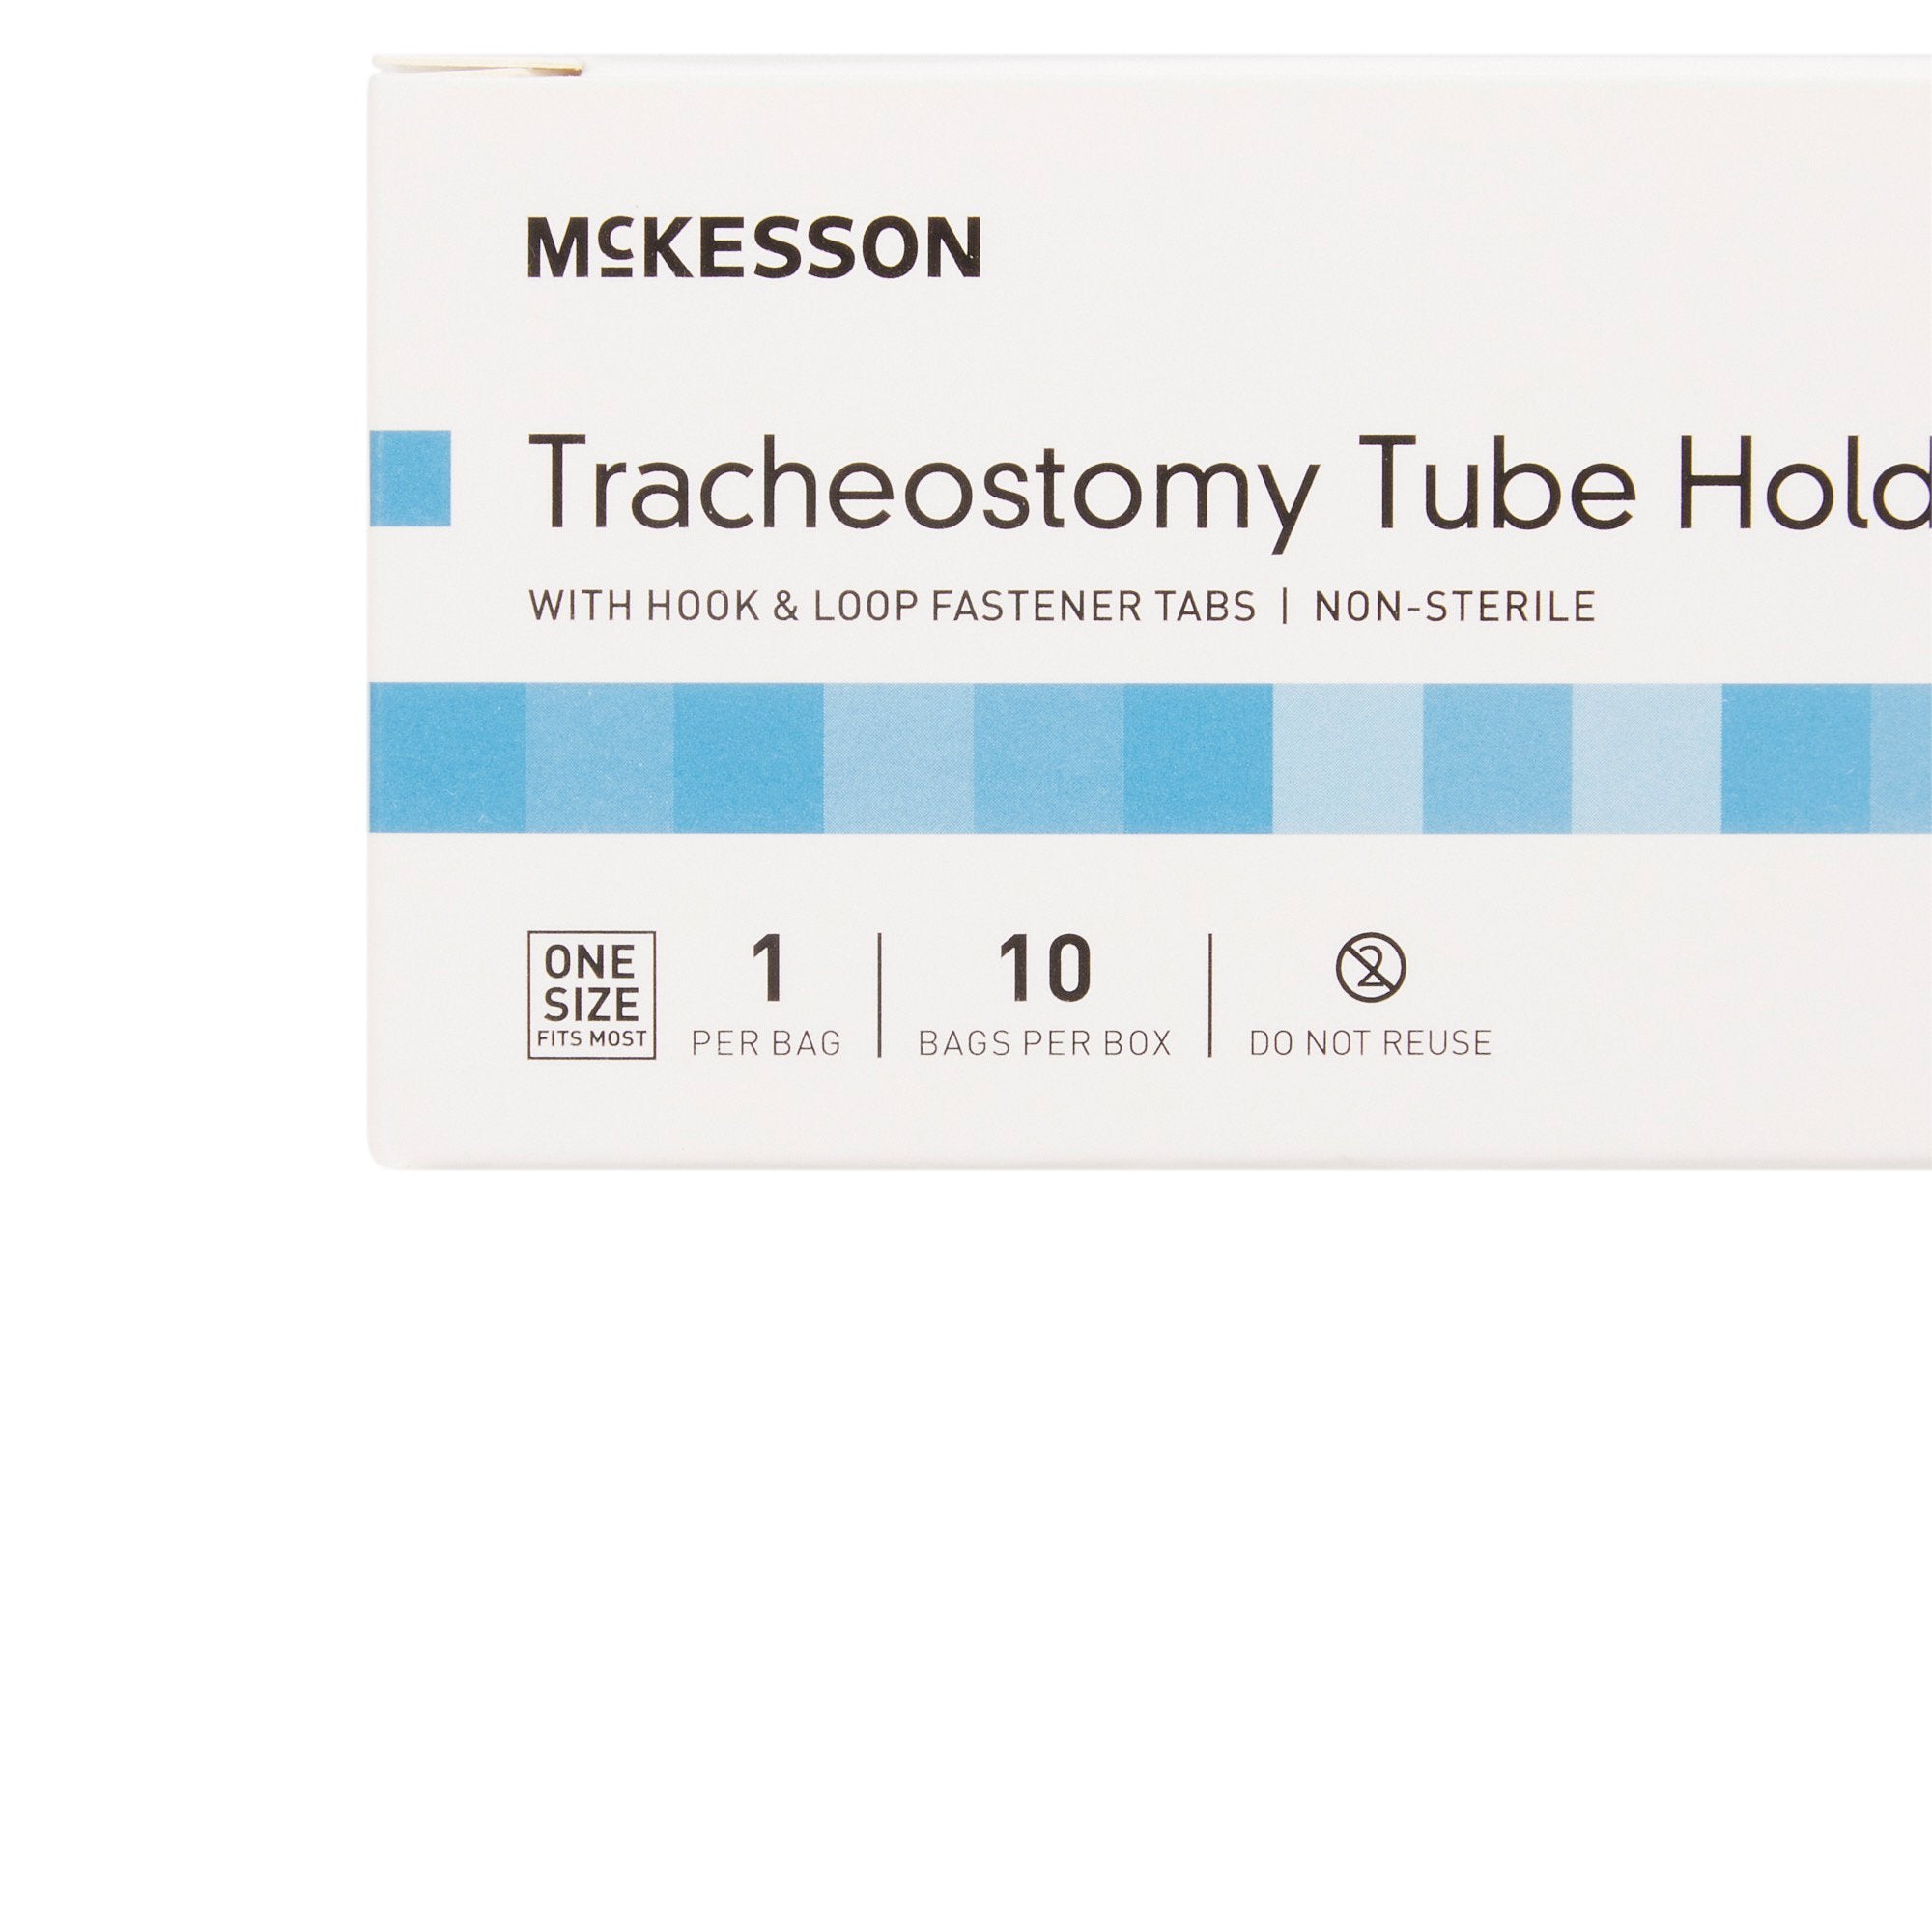 Tracheostomy Tube Holder McKesson One Size Fits Most Adult